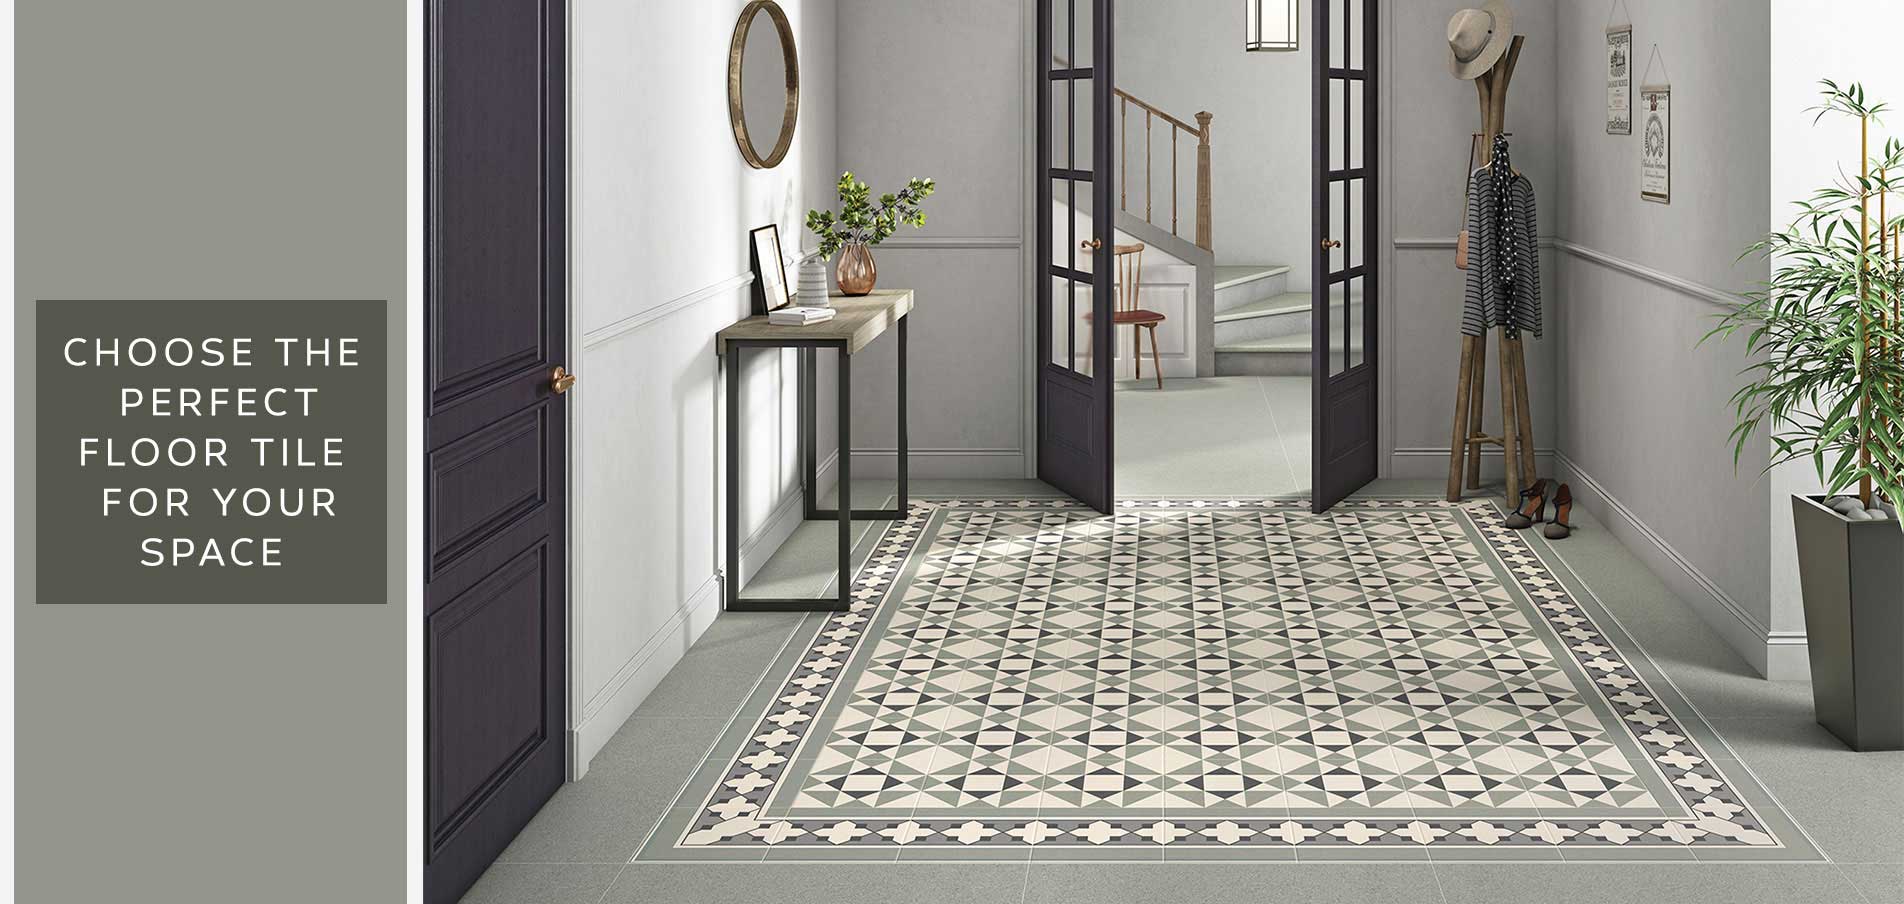 Elevate Your Space with High Quality Floor Tiles for Every Room